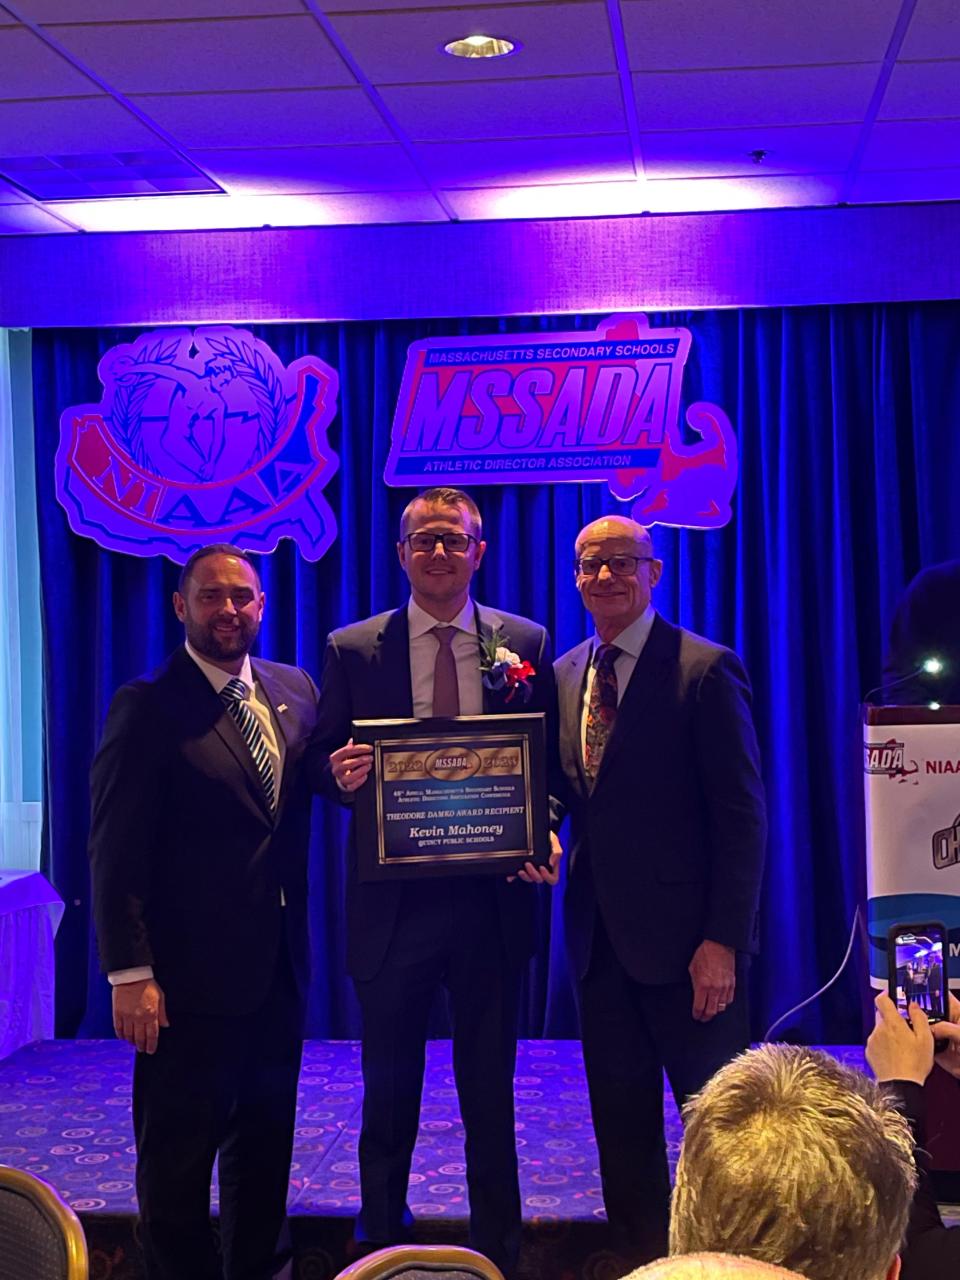 Kevin Mahoney receives the Ted Damko Award at the Massachusetts Secondary Schools Athletic Directors Association Conference last month.